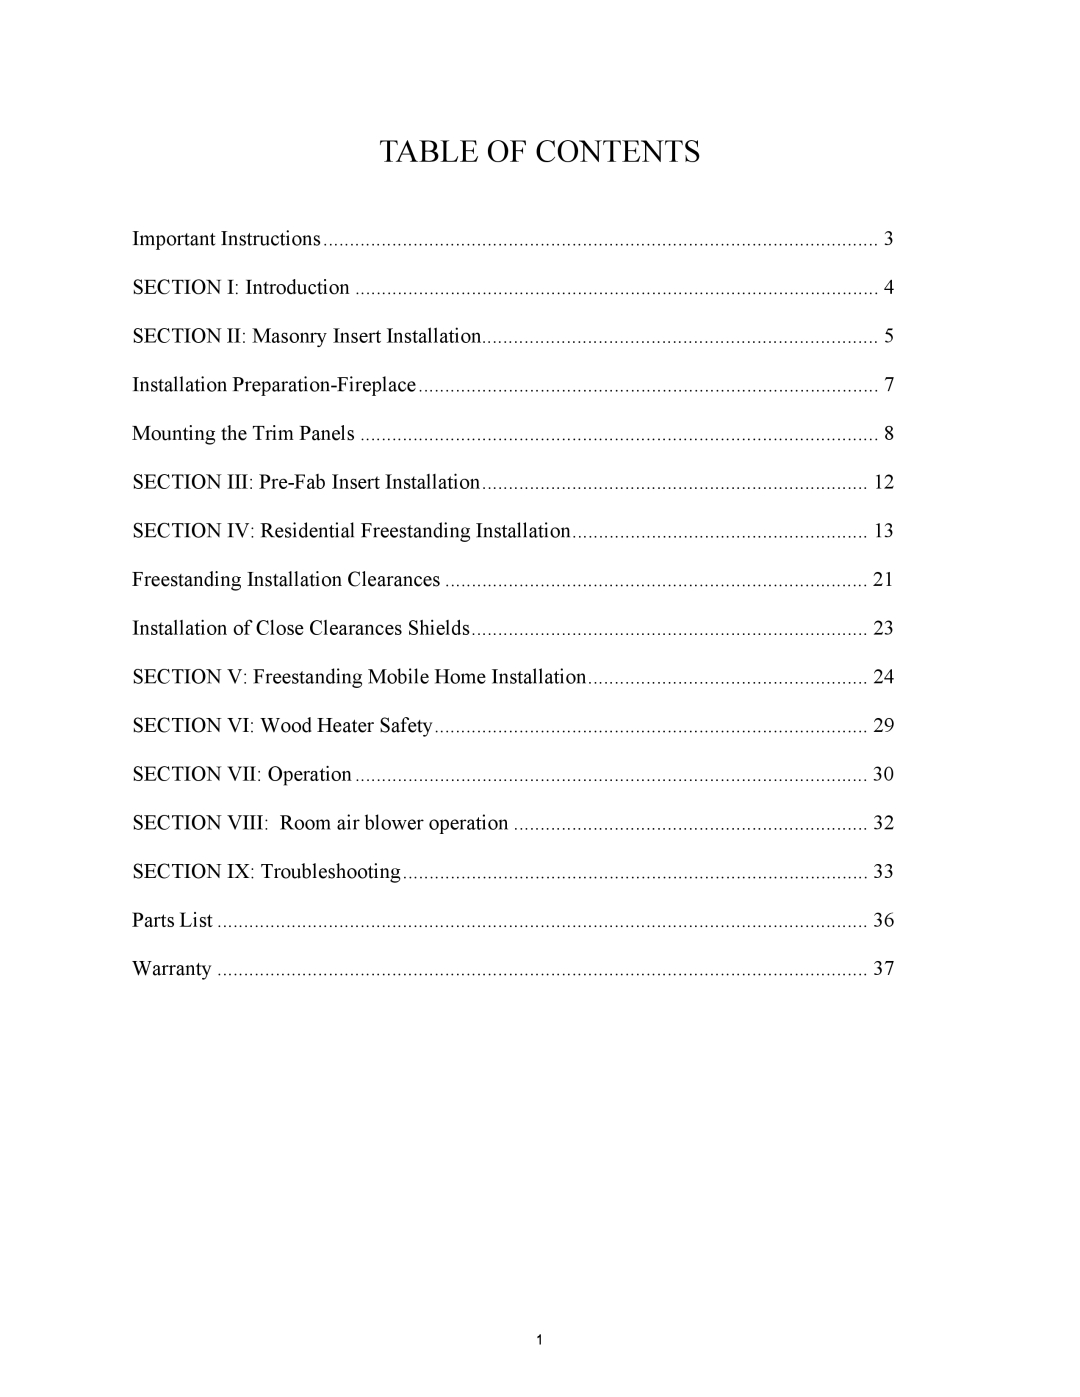 New Buck Corporation 81 installation instructions Table Of Contents 